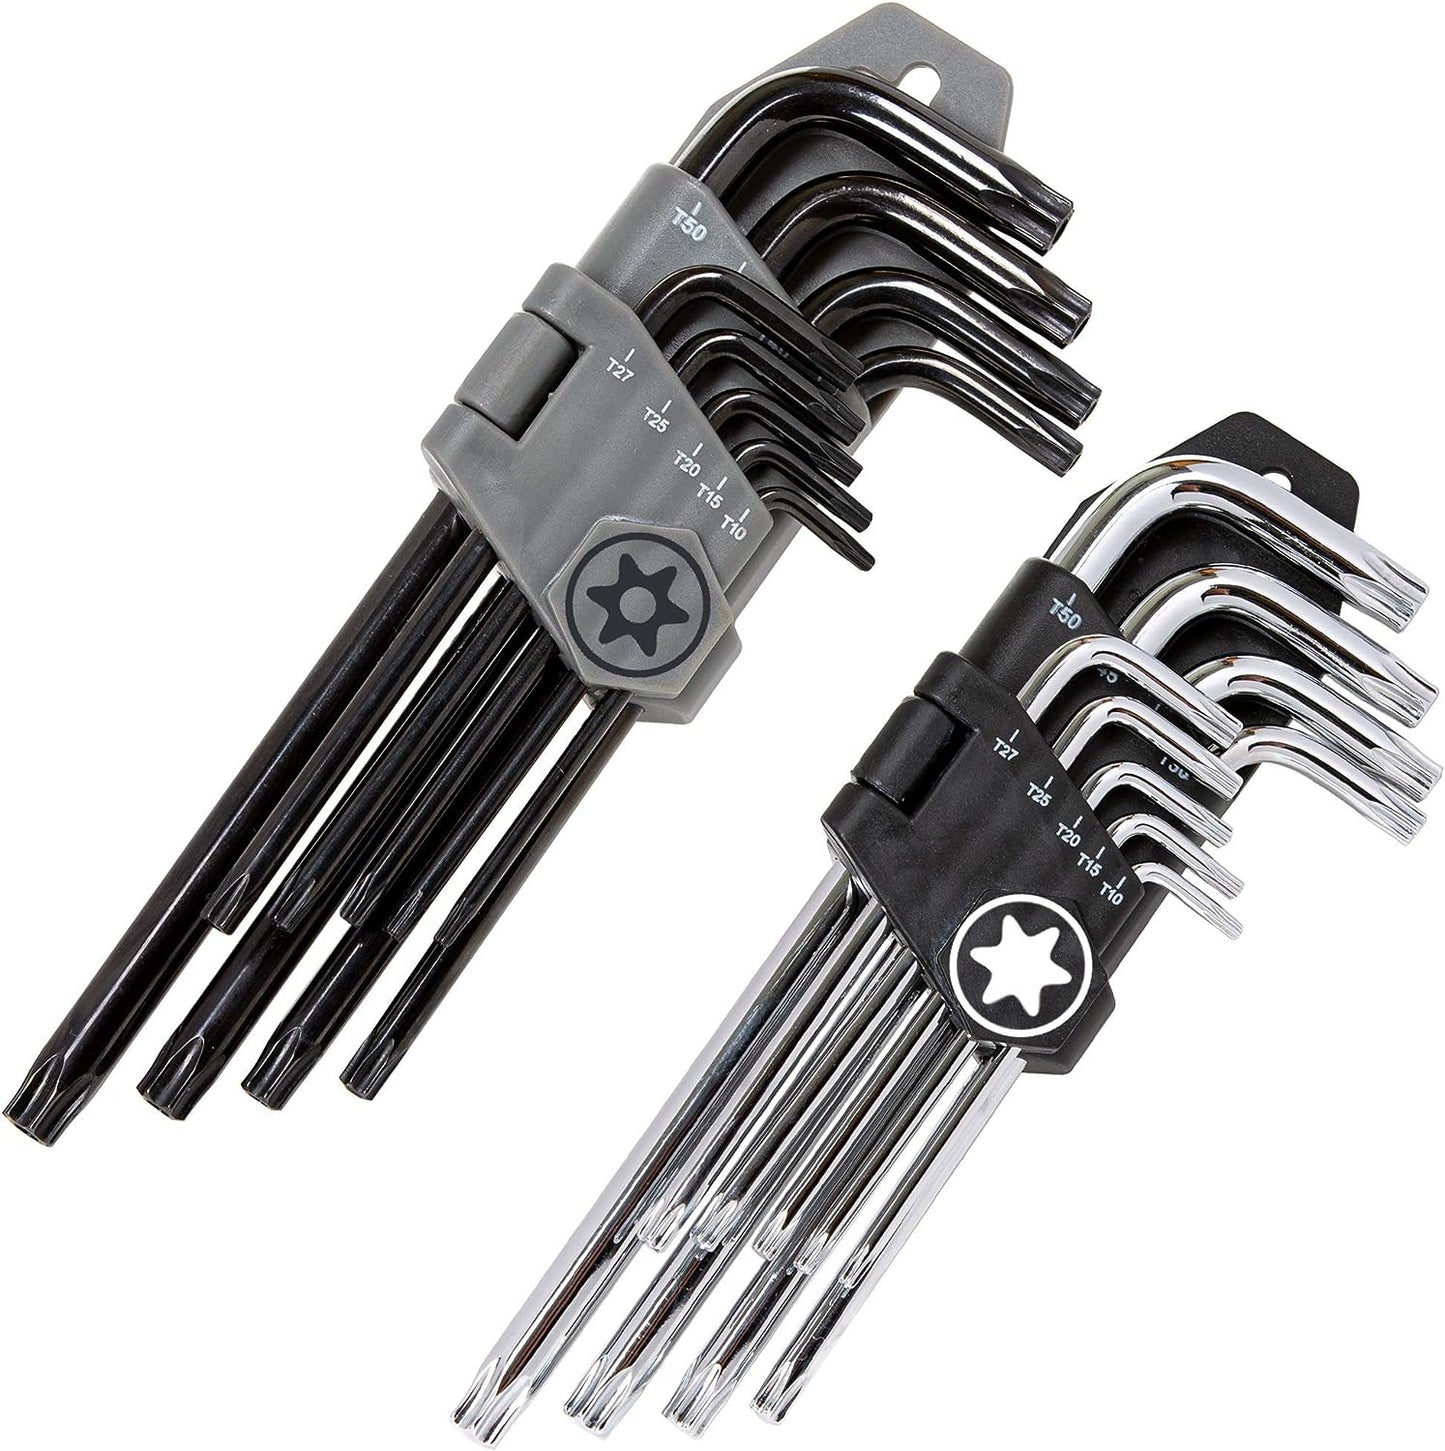 Owl Tools Torx Wrench and Security Bit Wrench Set (18 Wrenches) 9 Standard Torx Star Wrenches and 9 Security Tamper Proof Torx Wrenches